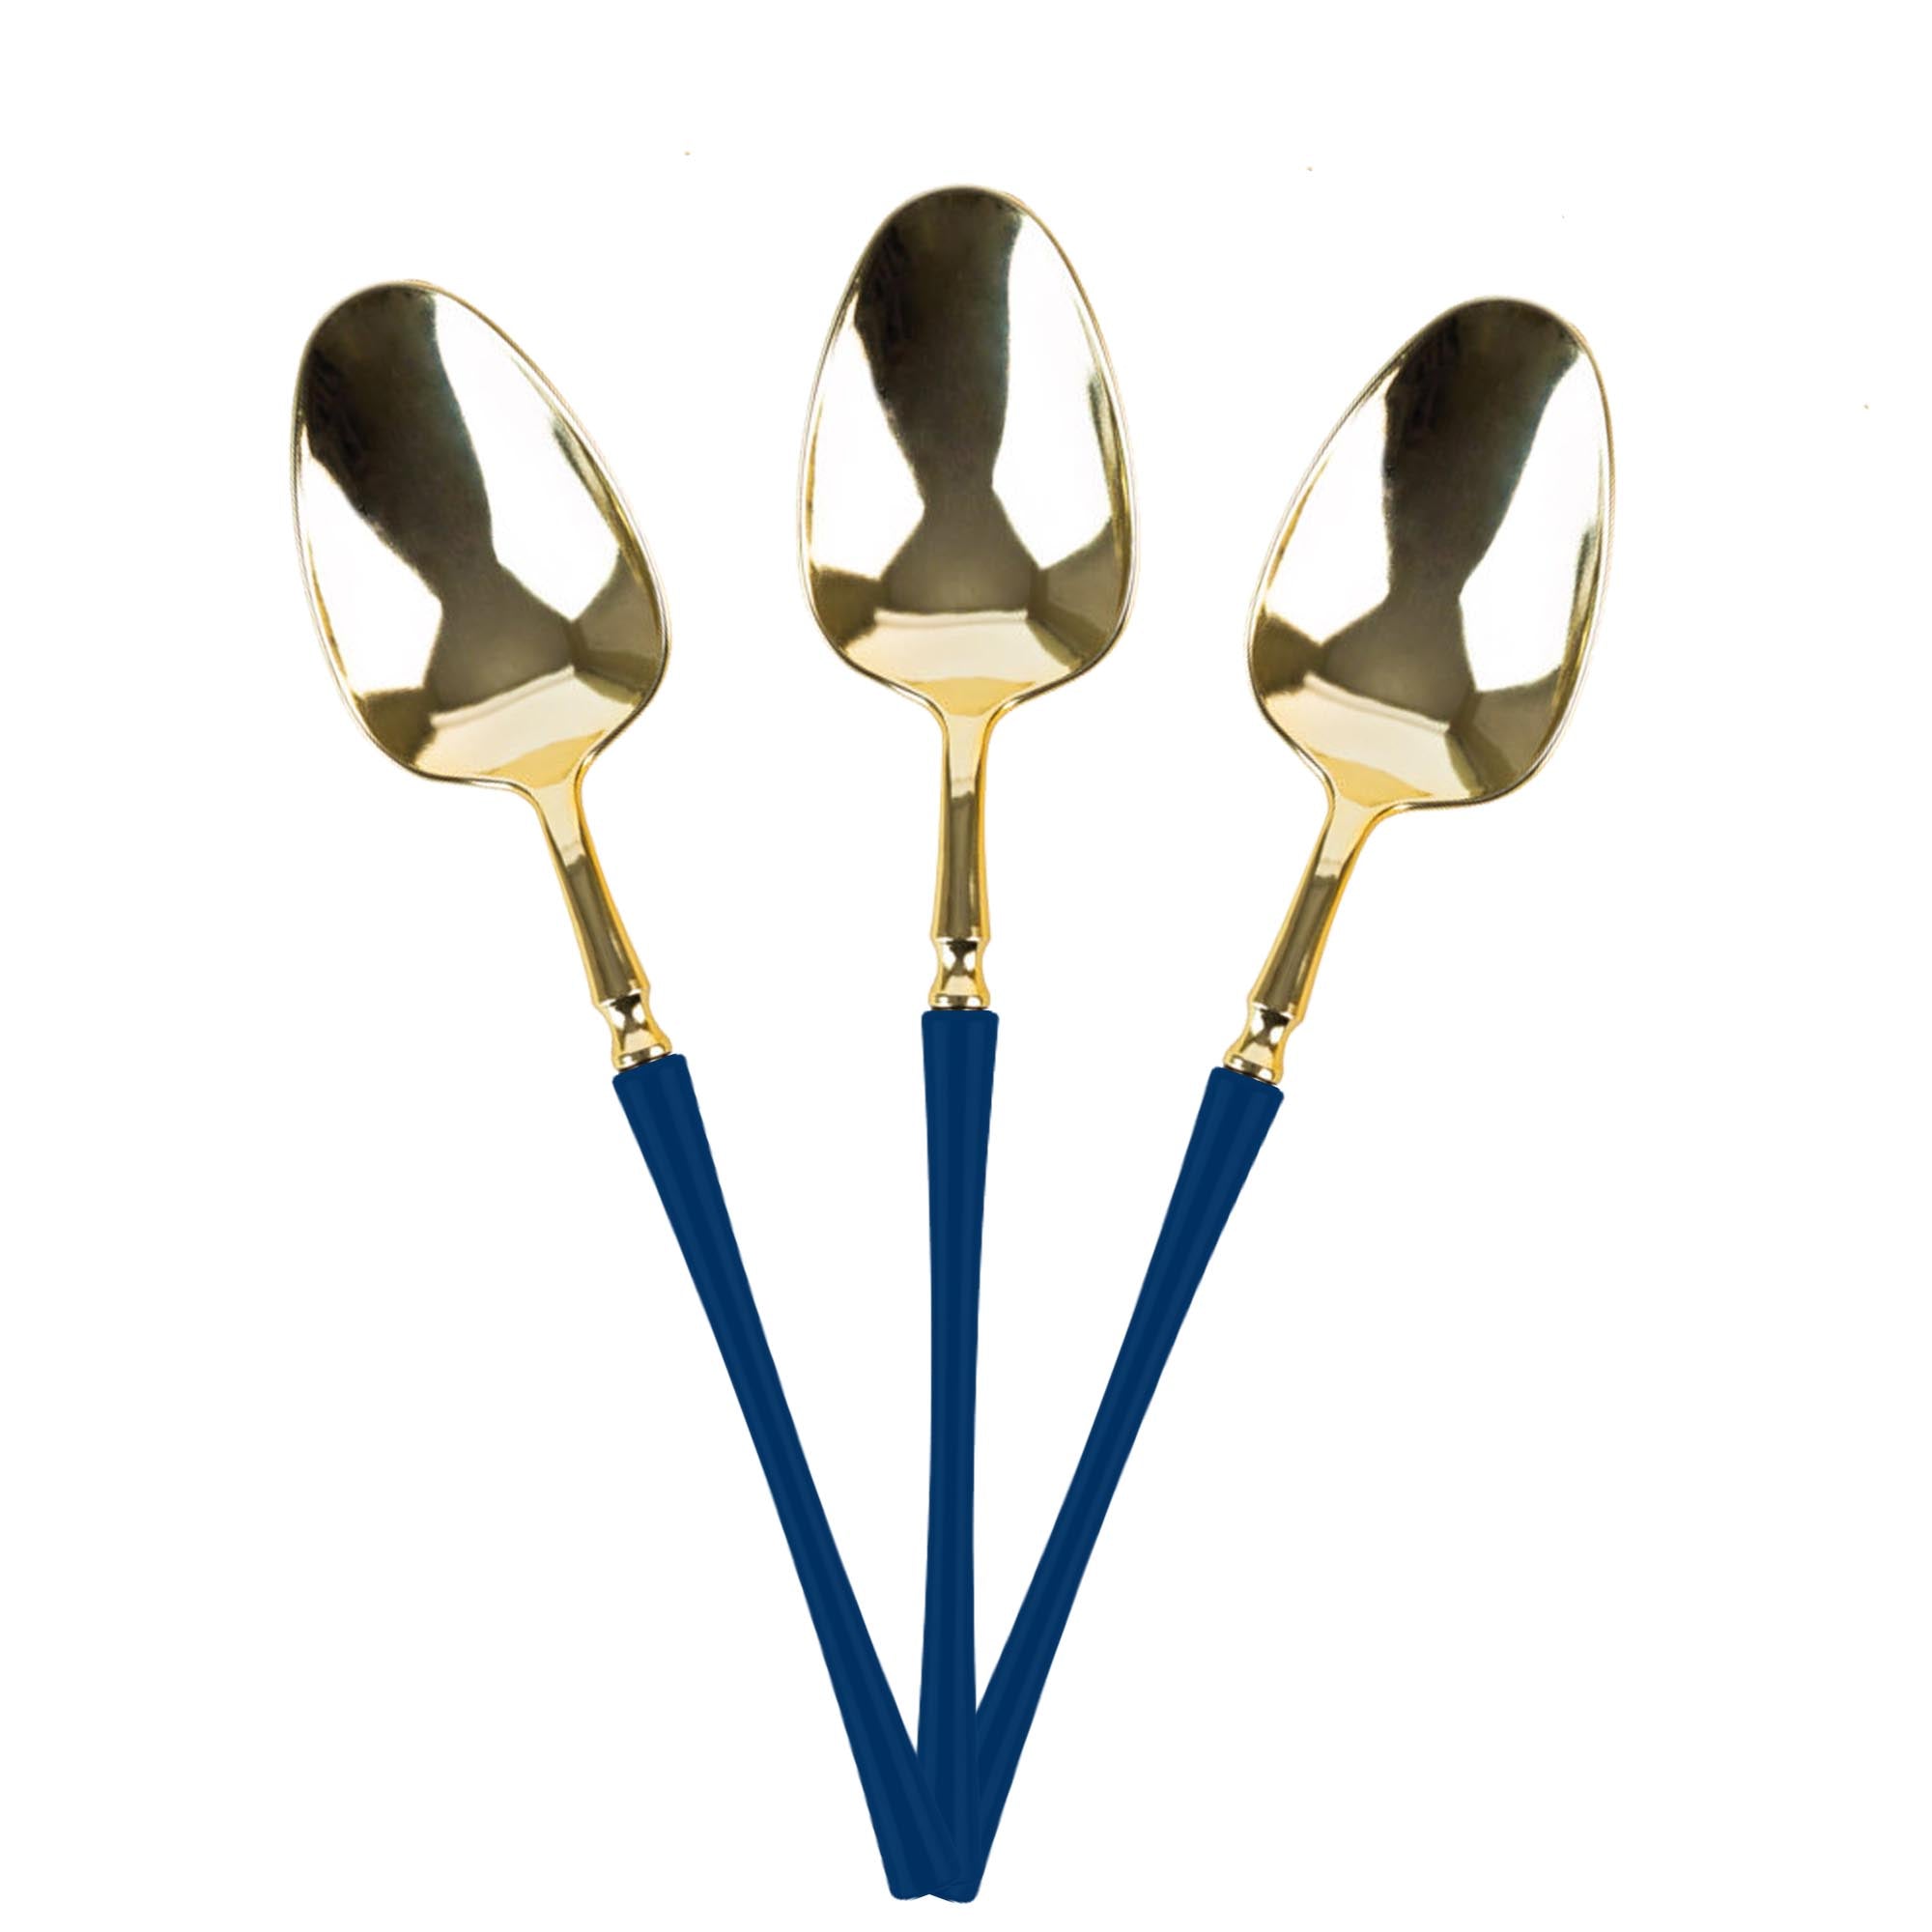 Plastic Soup Spoons Navy Blue and Gold Infinity Flatware Collection